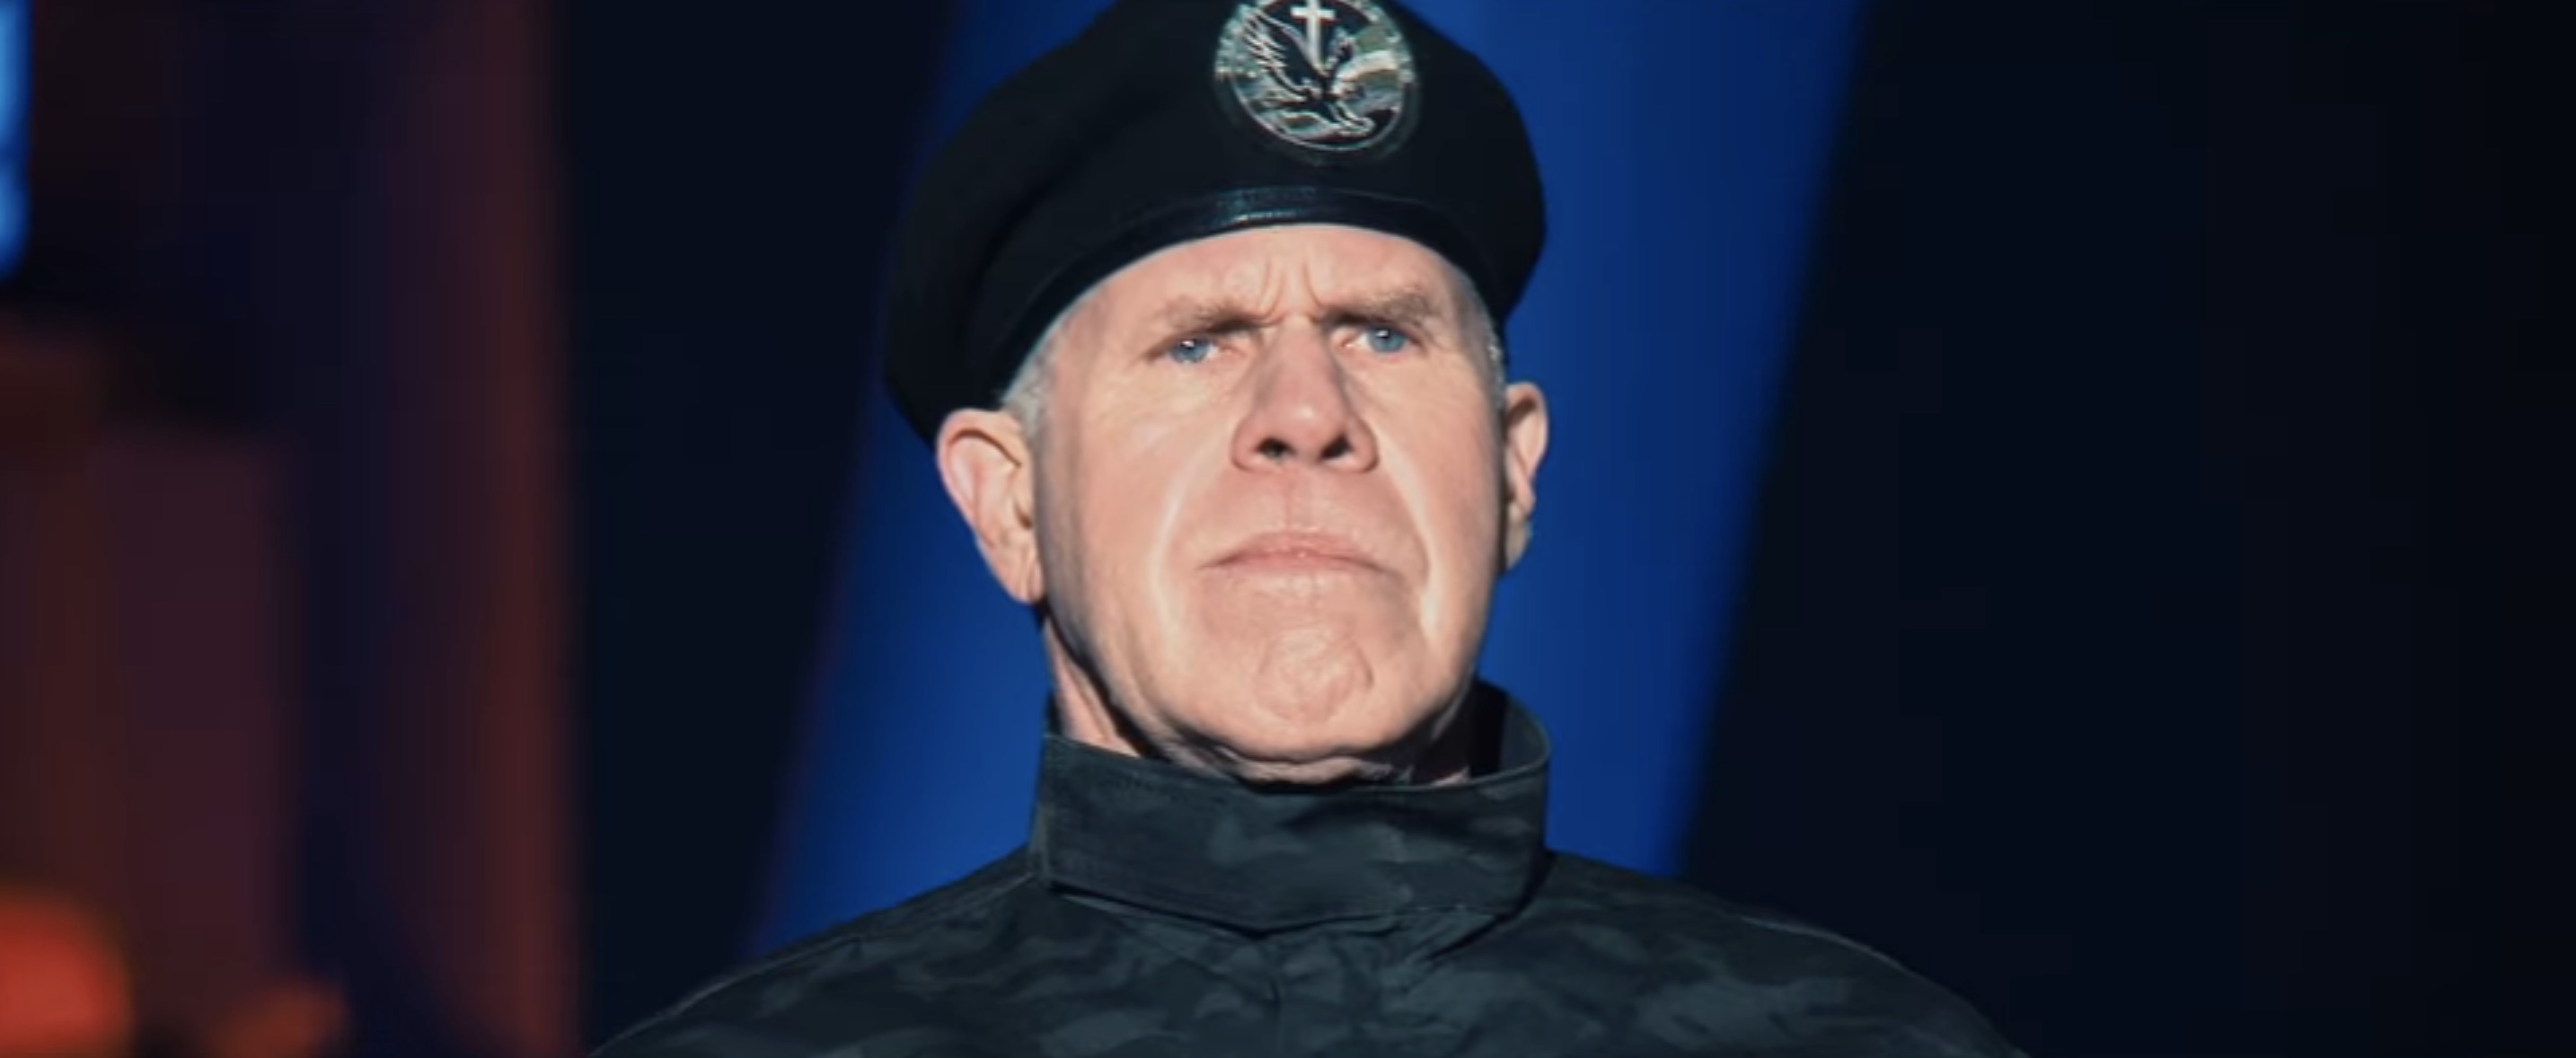 Don't Look Up Cast - Ron Perlman as Benedict Drask